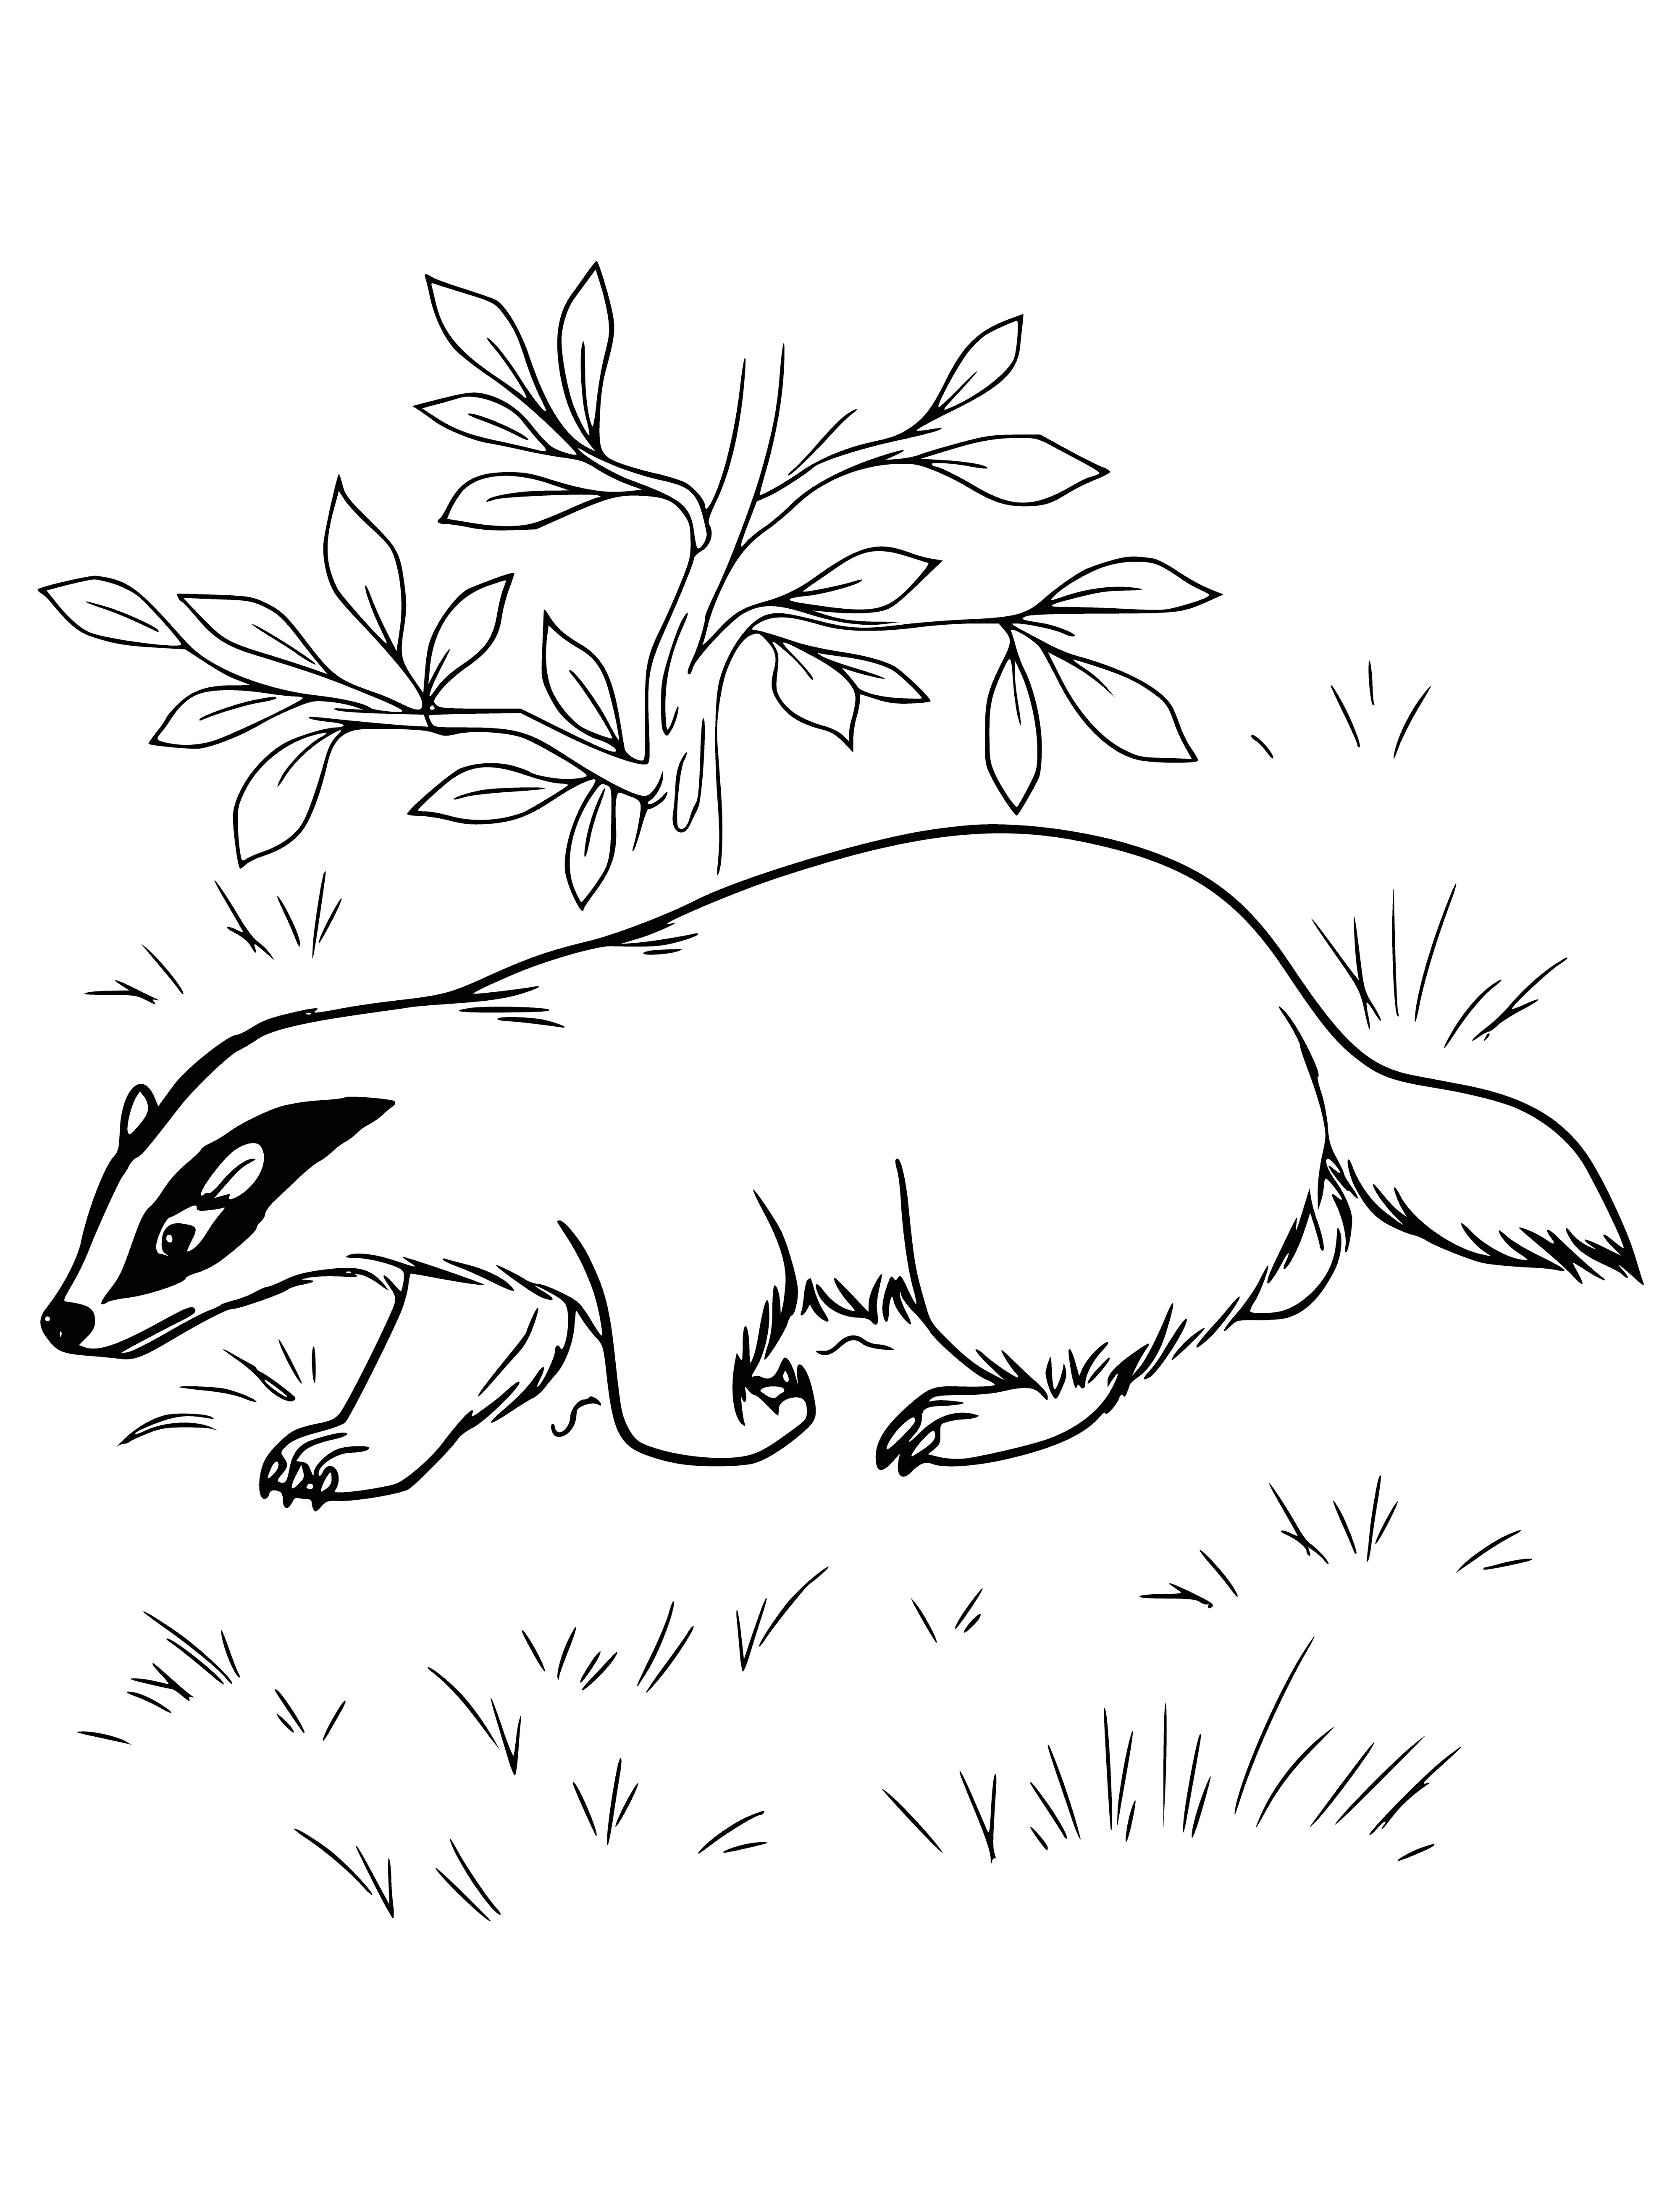 coloring page: Badger: small, furry mammal; white stripe down back; dark fur; scavenger, eats insects, small mammals, carrion.